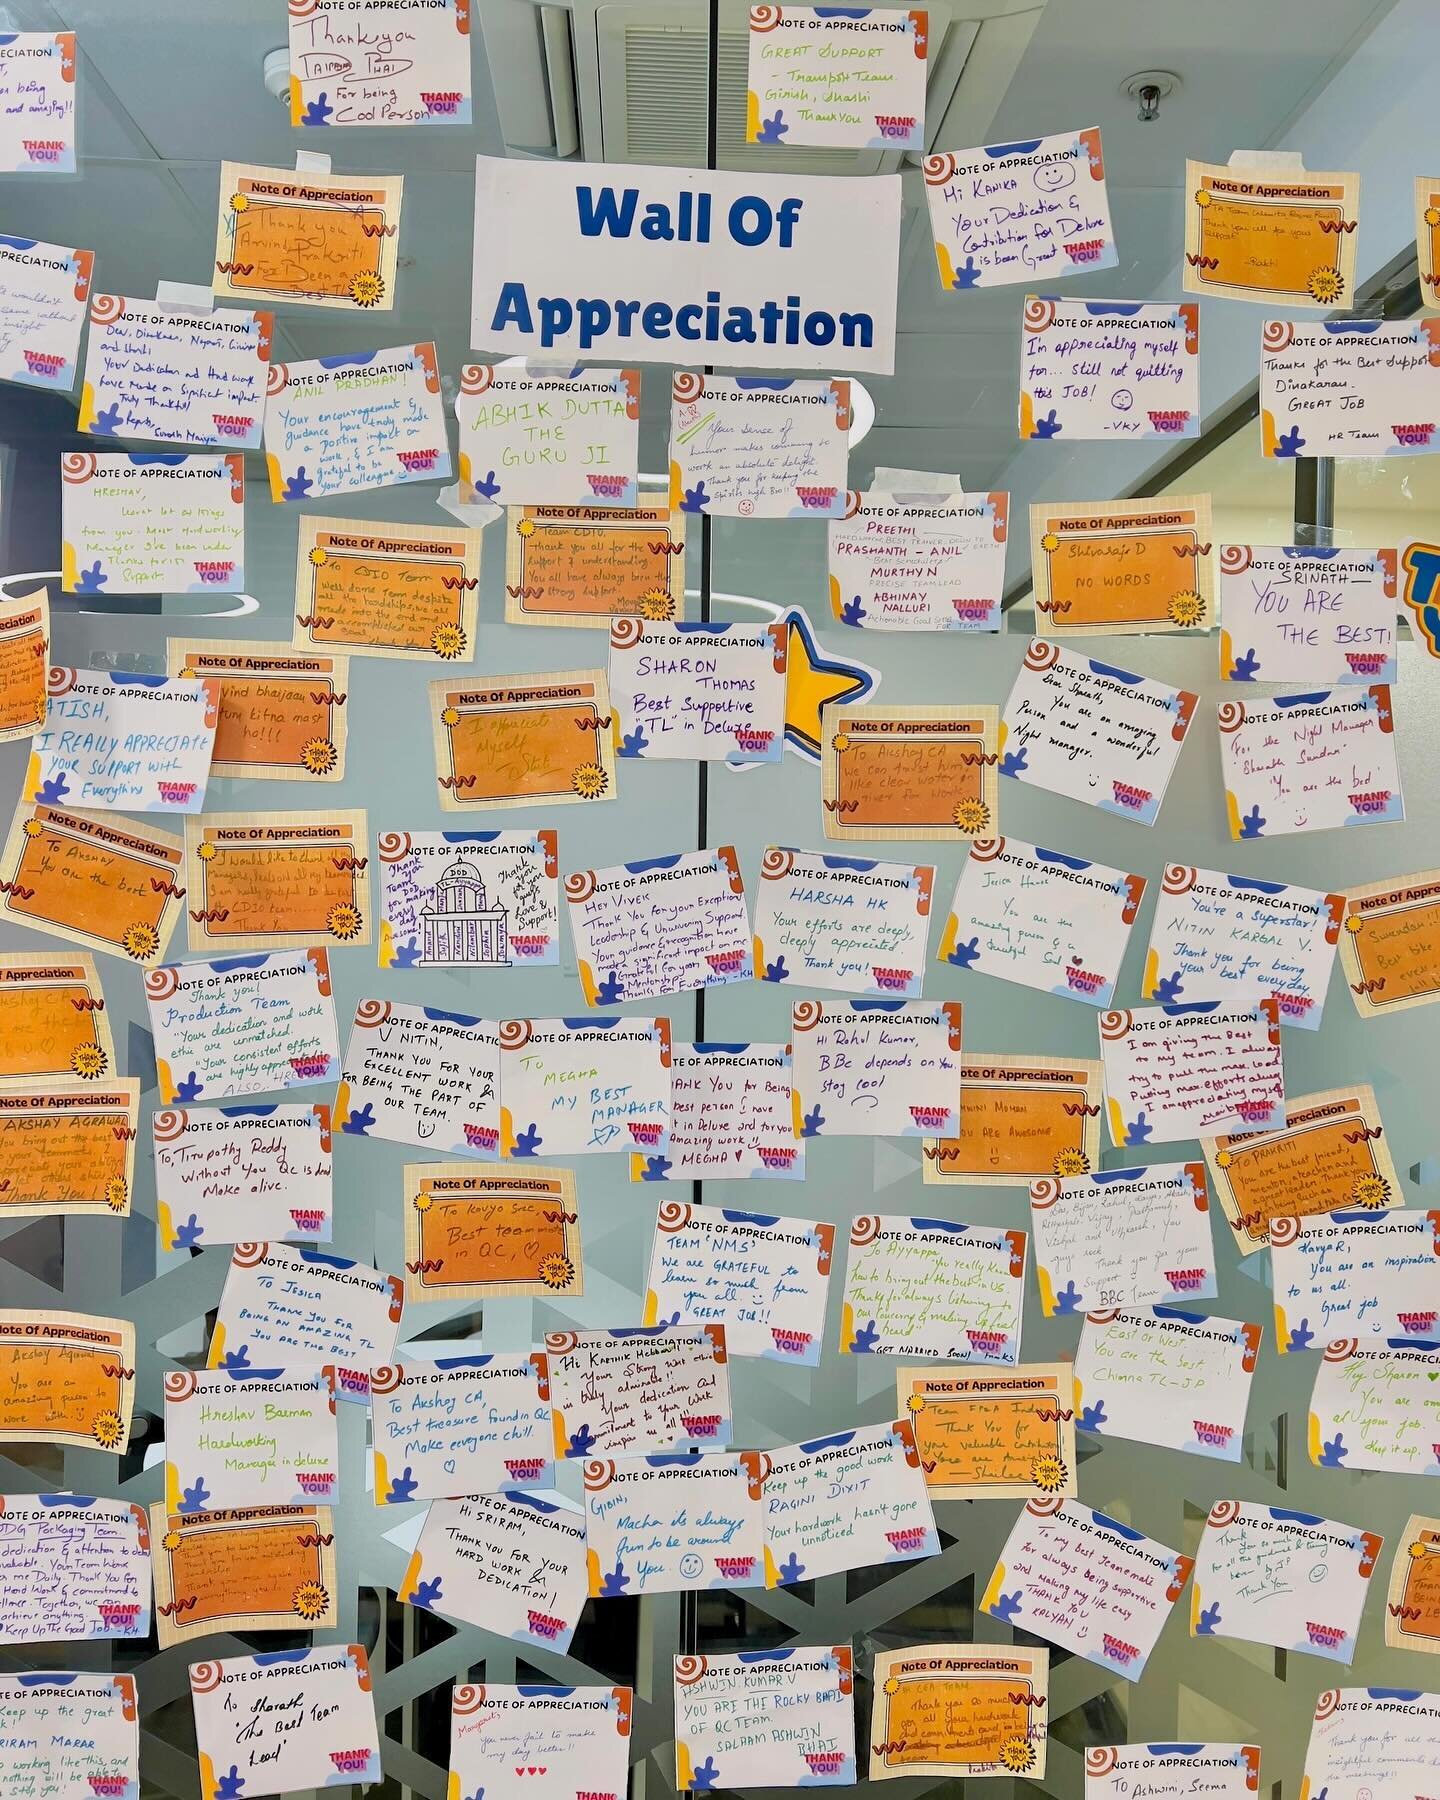 On Employee Appreciation Day, we created a heartwarming Employee Appreciation Wall where employees could openly express their appreciation for each other. The wall became a focal point of love and support, radiating positive energy at the workplace. 